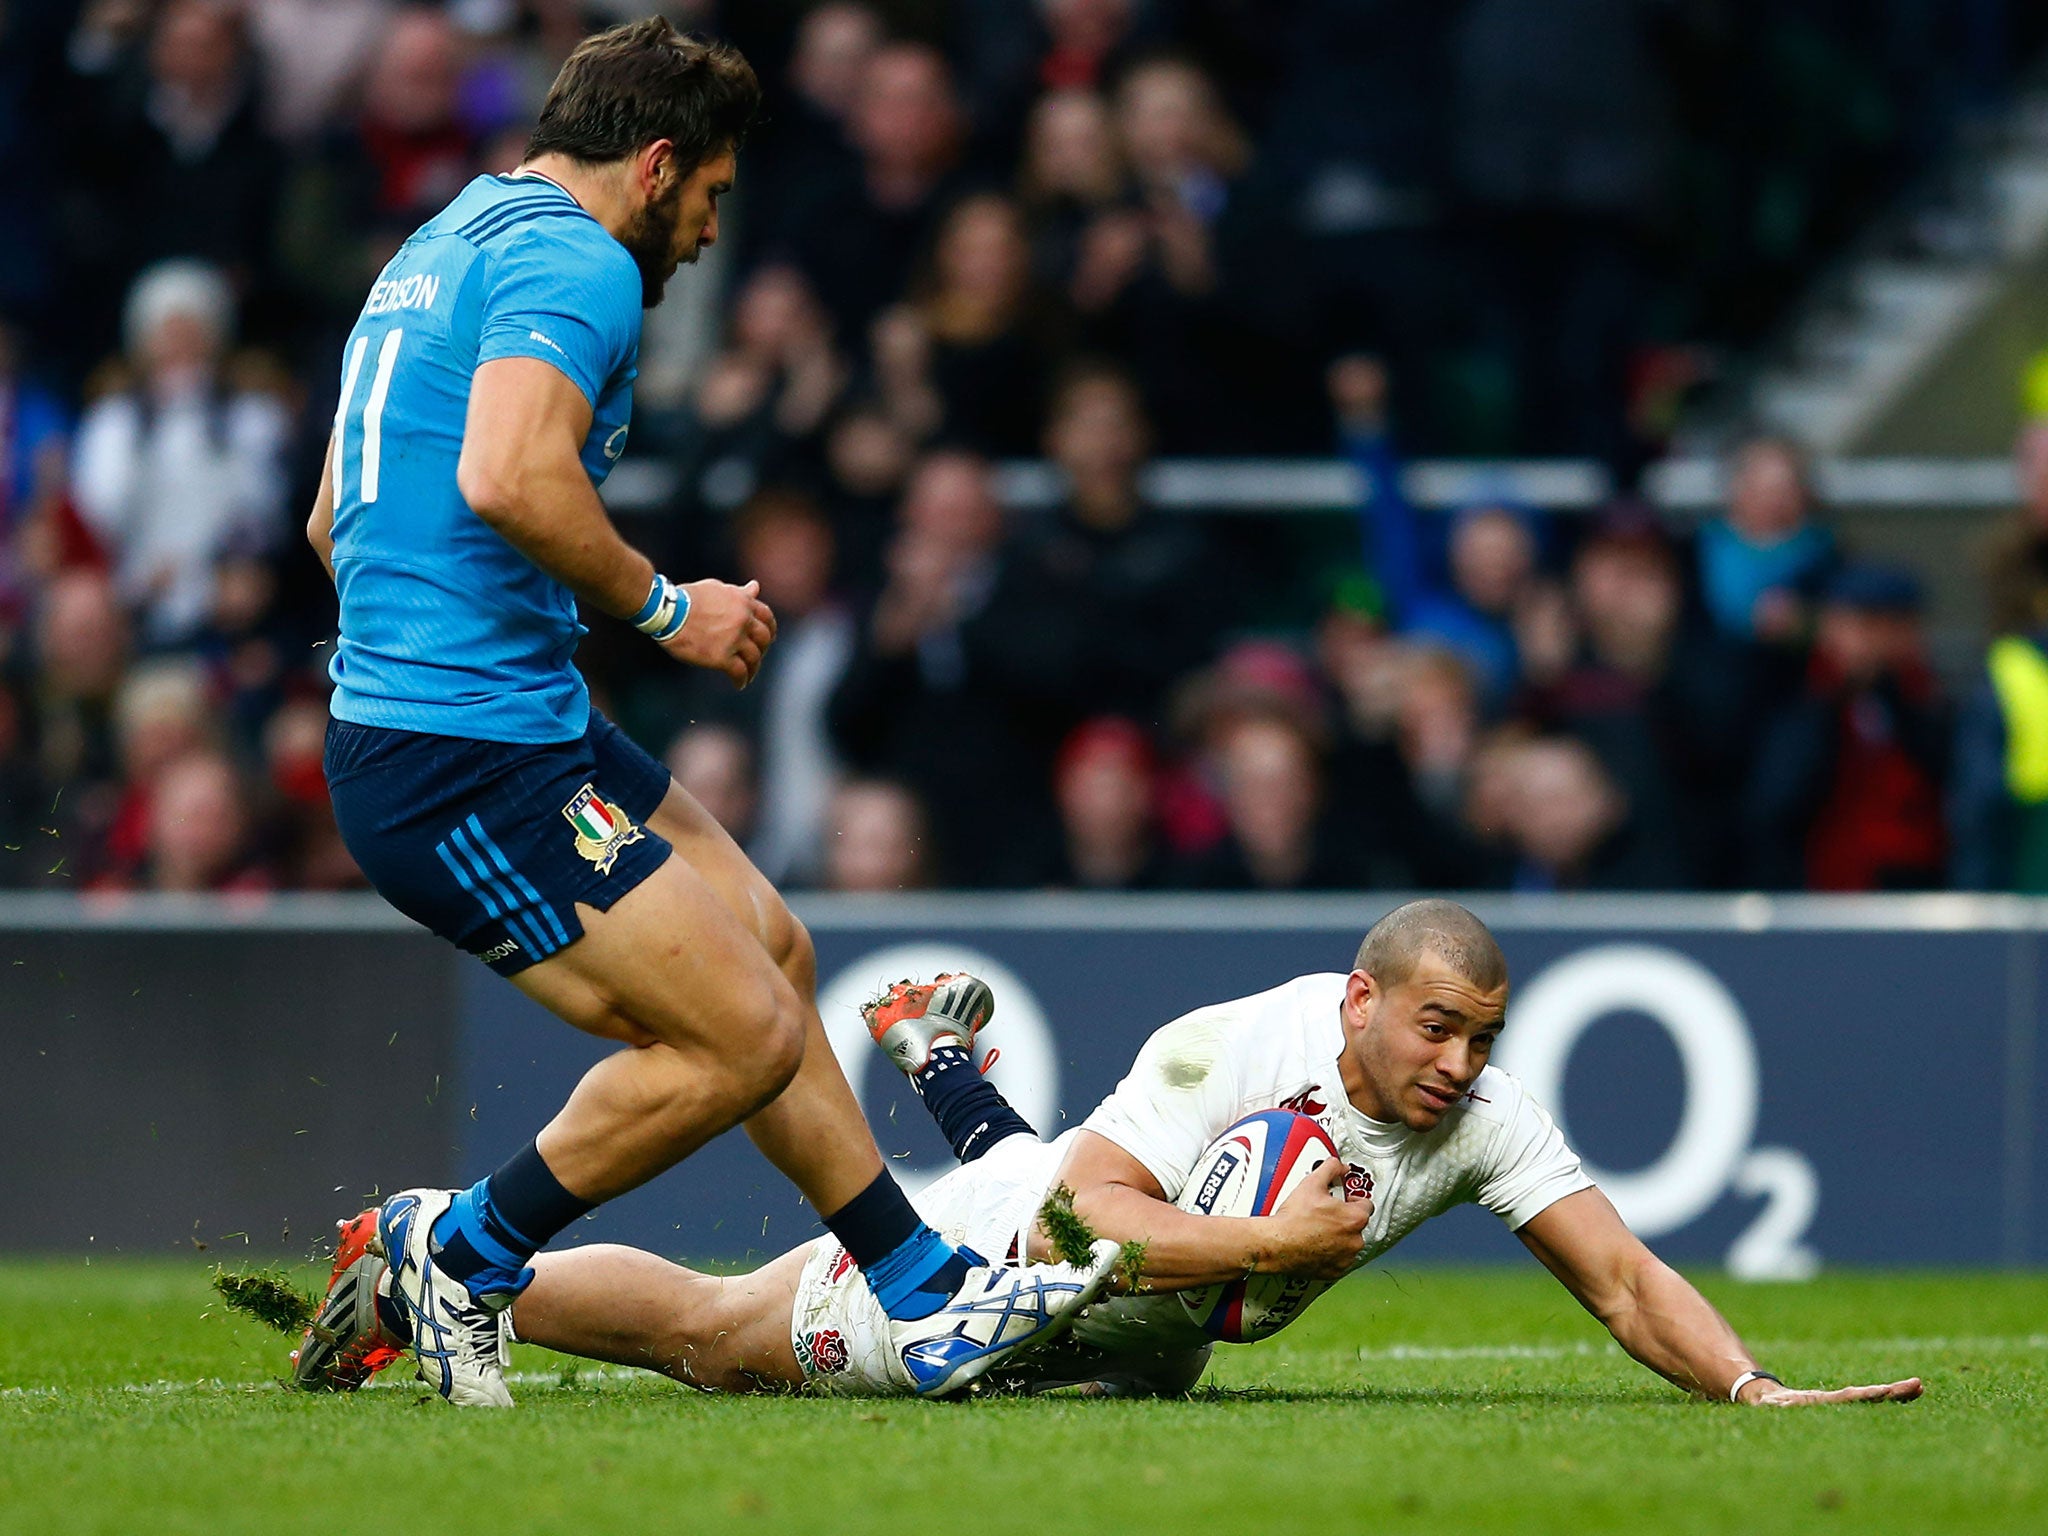 Jonathan Joseph scores his second try against Italy